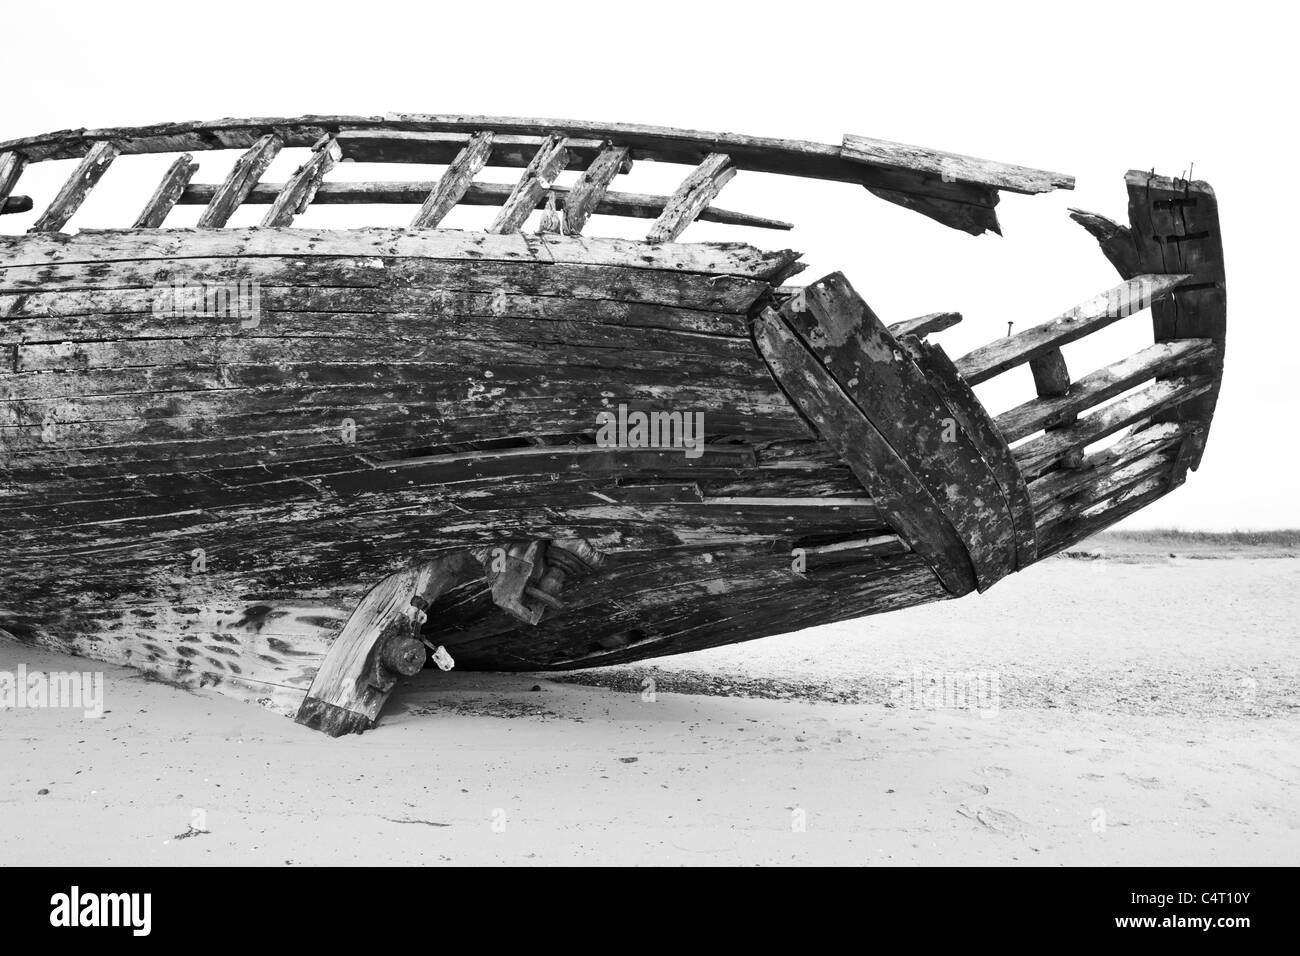 A Wrecked Wooden Boat Stock Photo